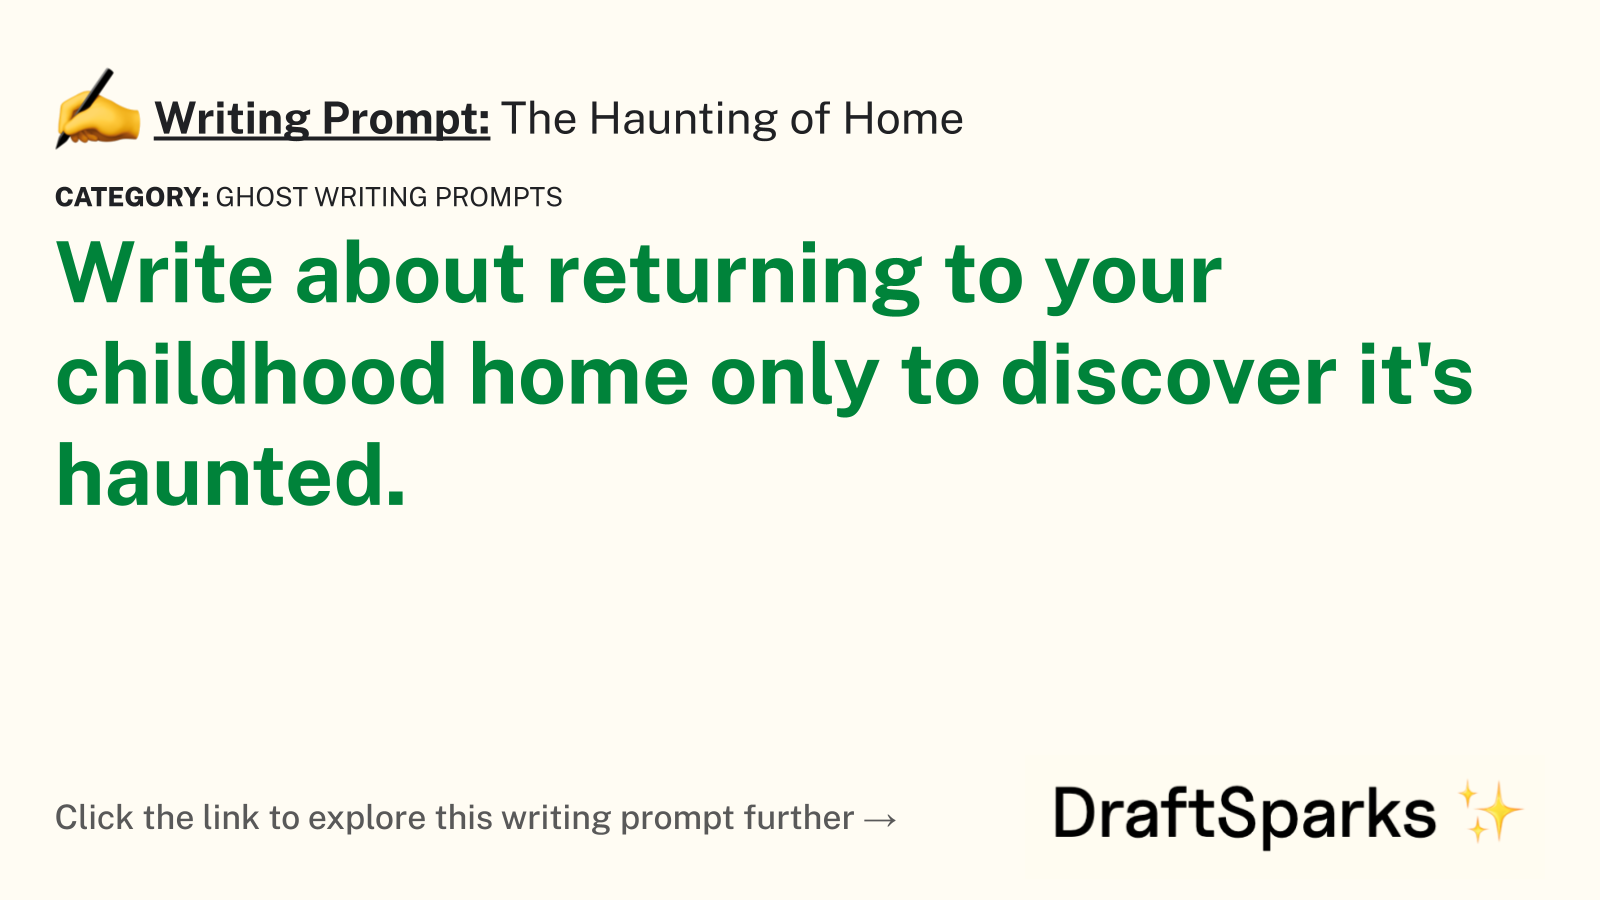 The Haunting of Home